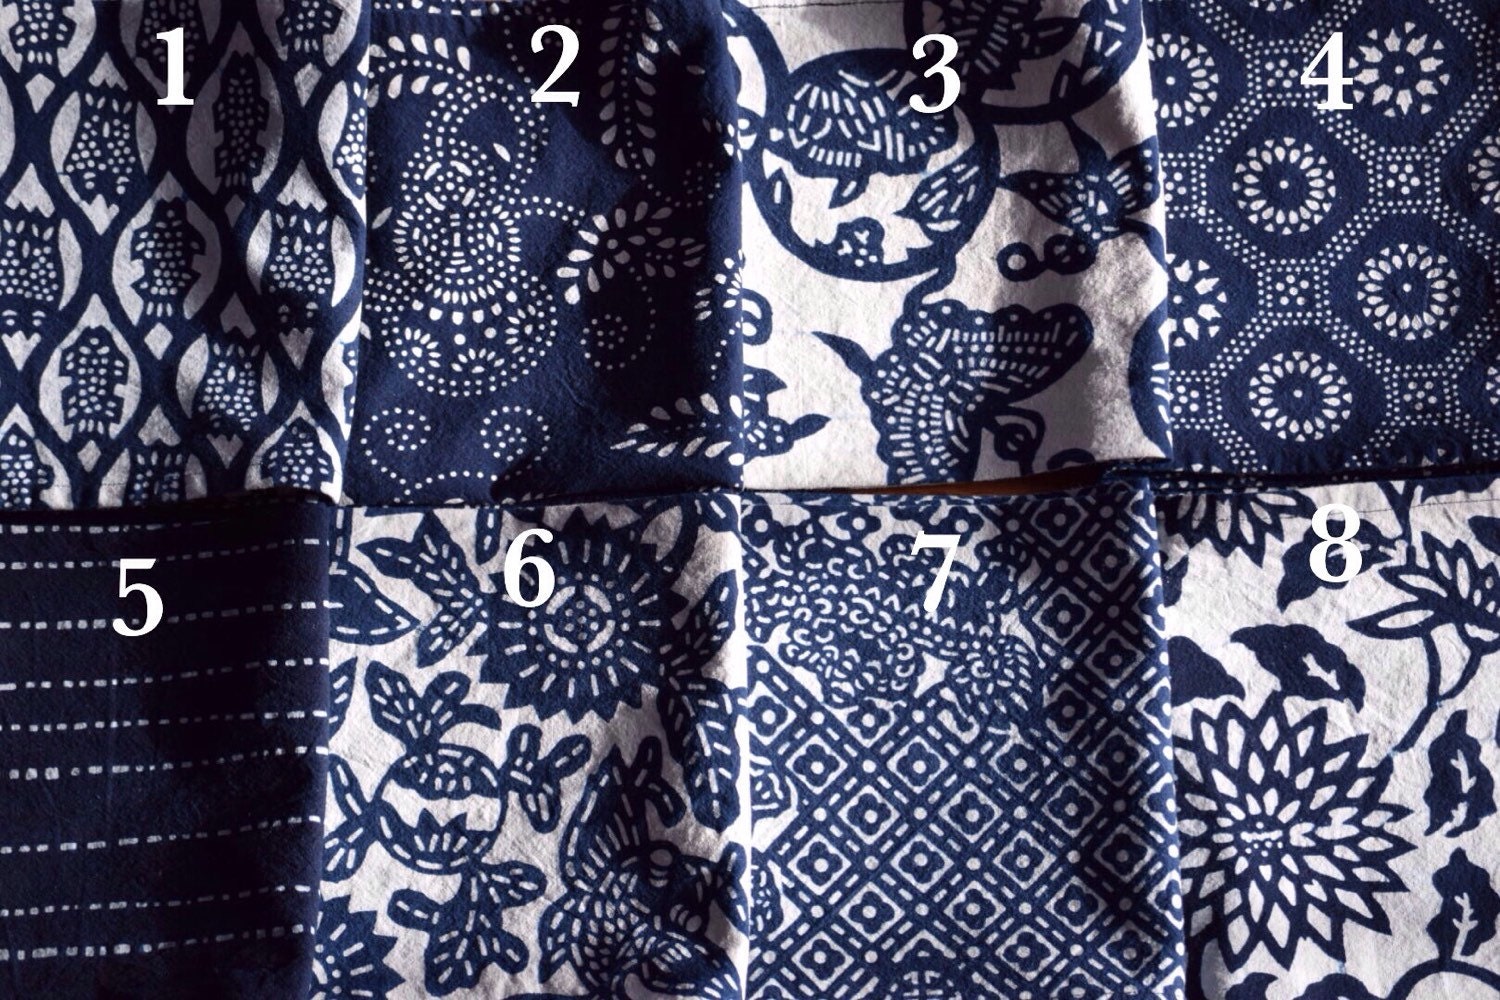 Indigo nankeen fabric by the yard. Hand stenciled on cotton